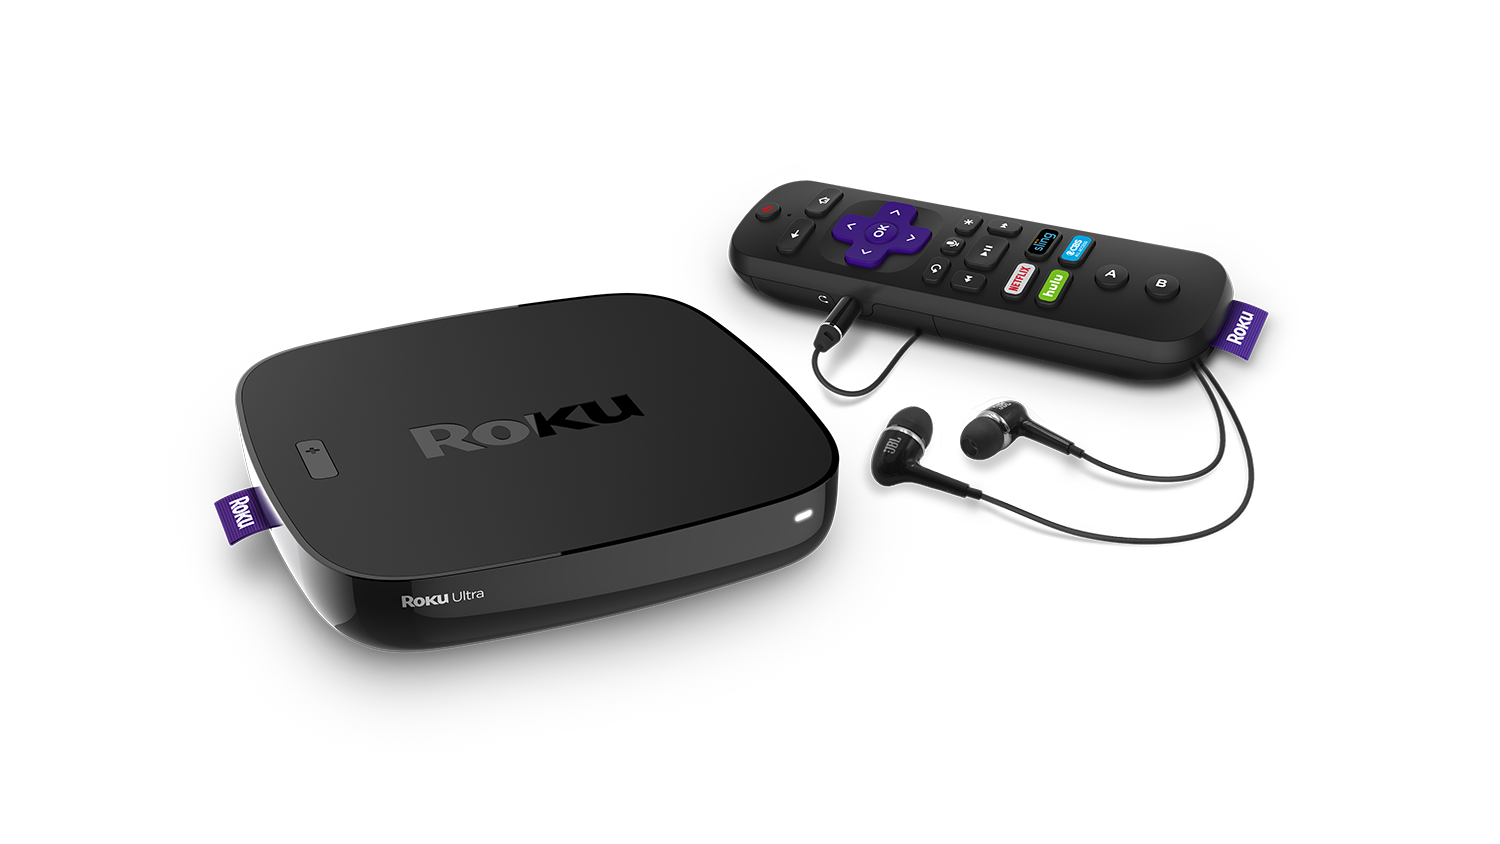 10 Roku Accessories to Help You Get the Most from Your Roku Player & Roku TV